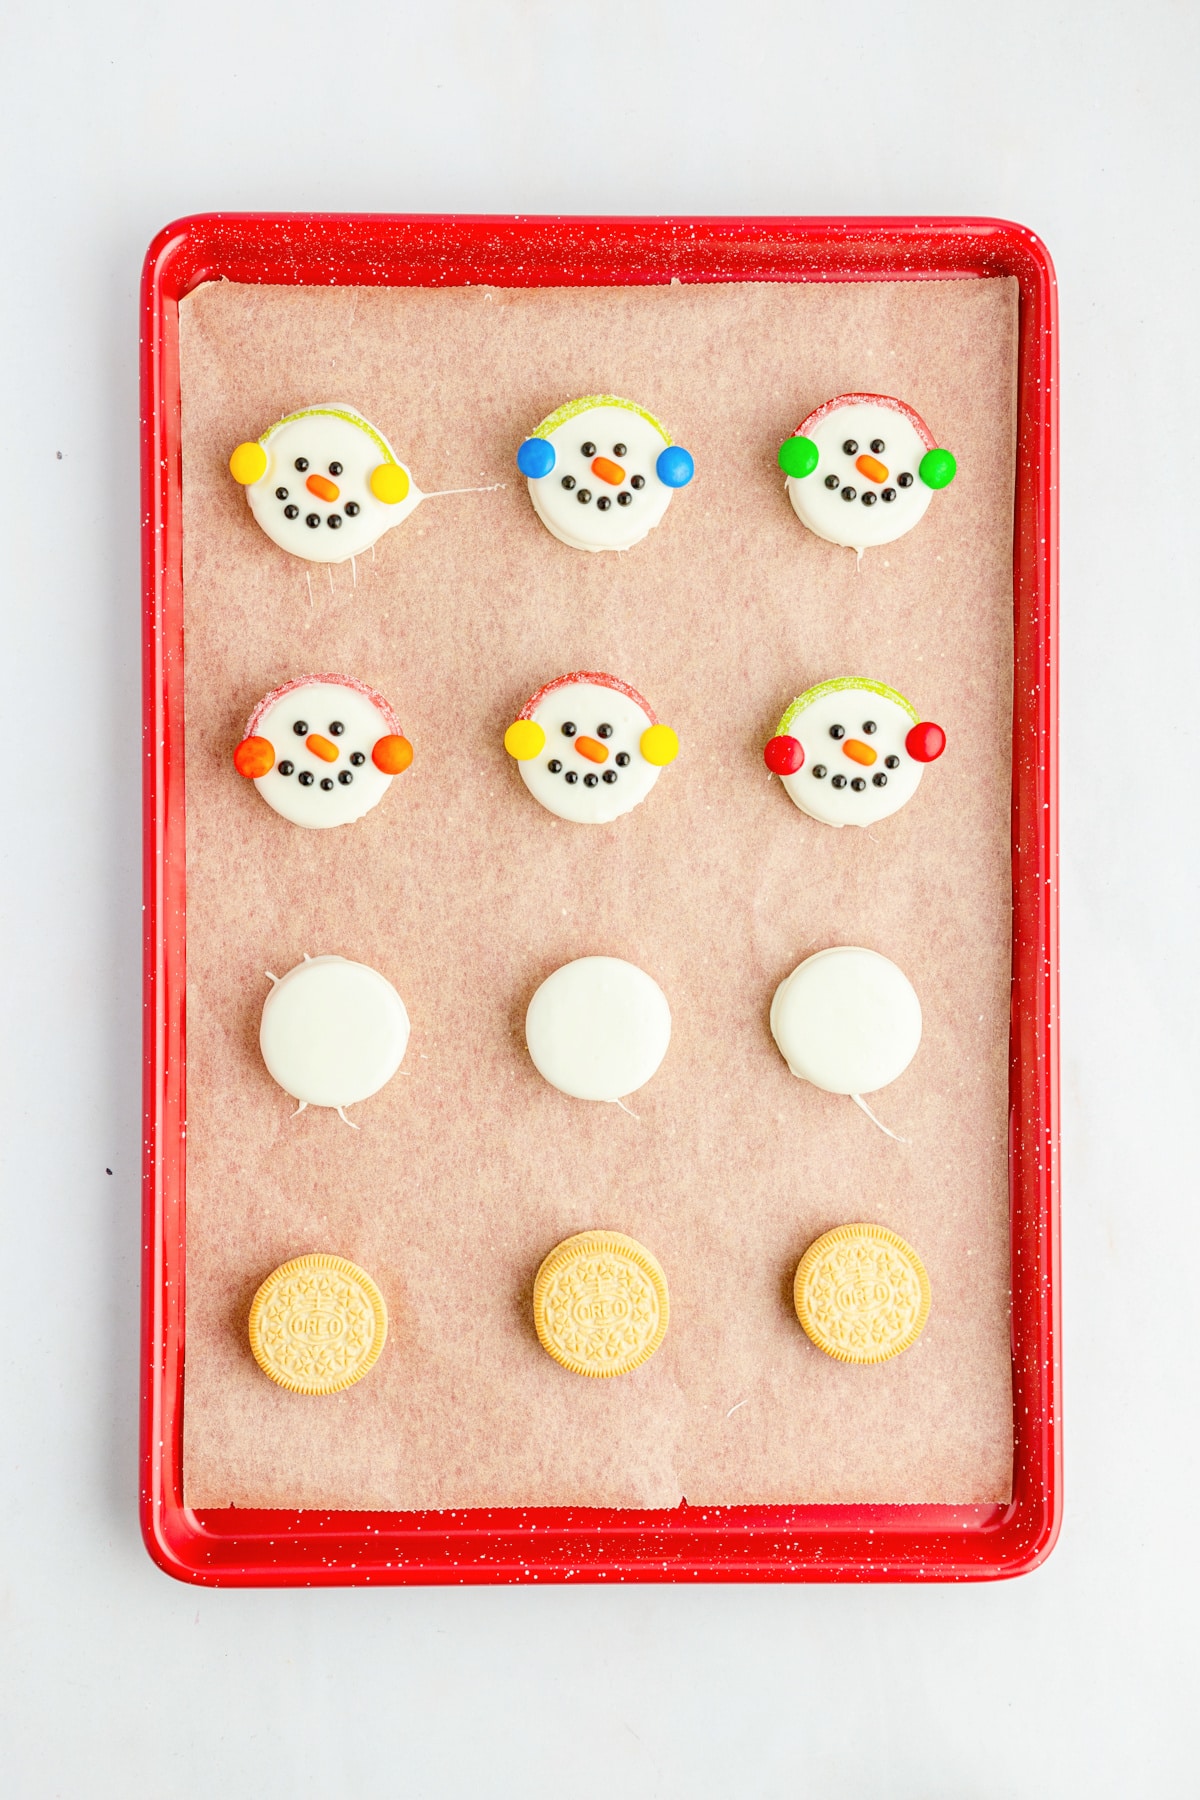 place dipped cookies on baking sheet